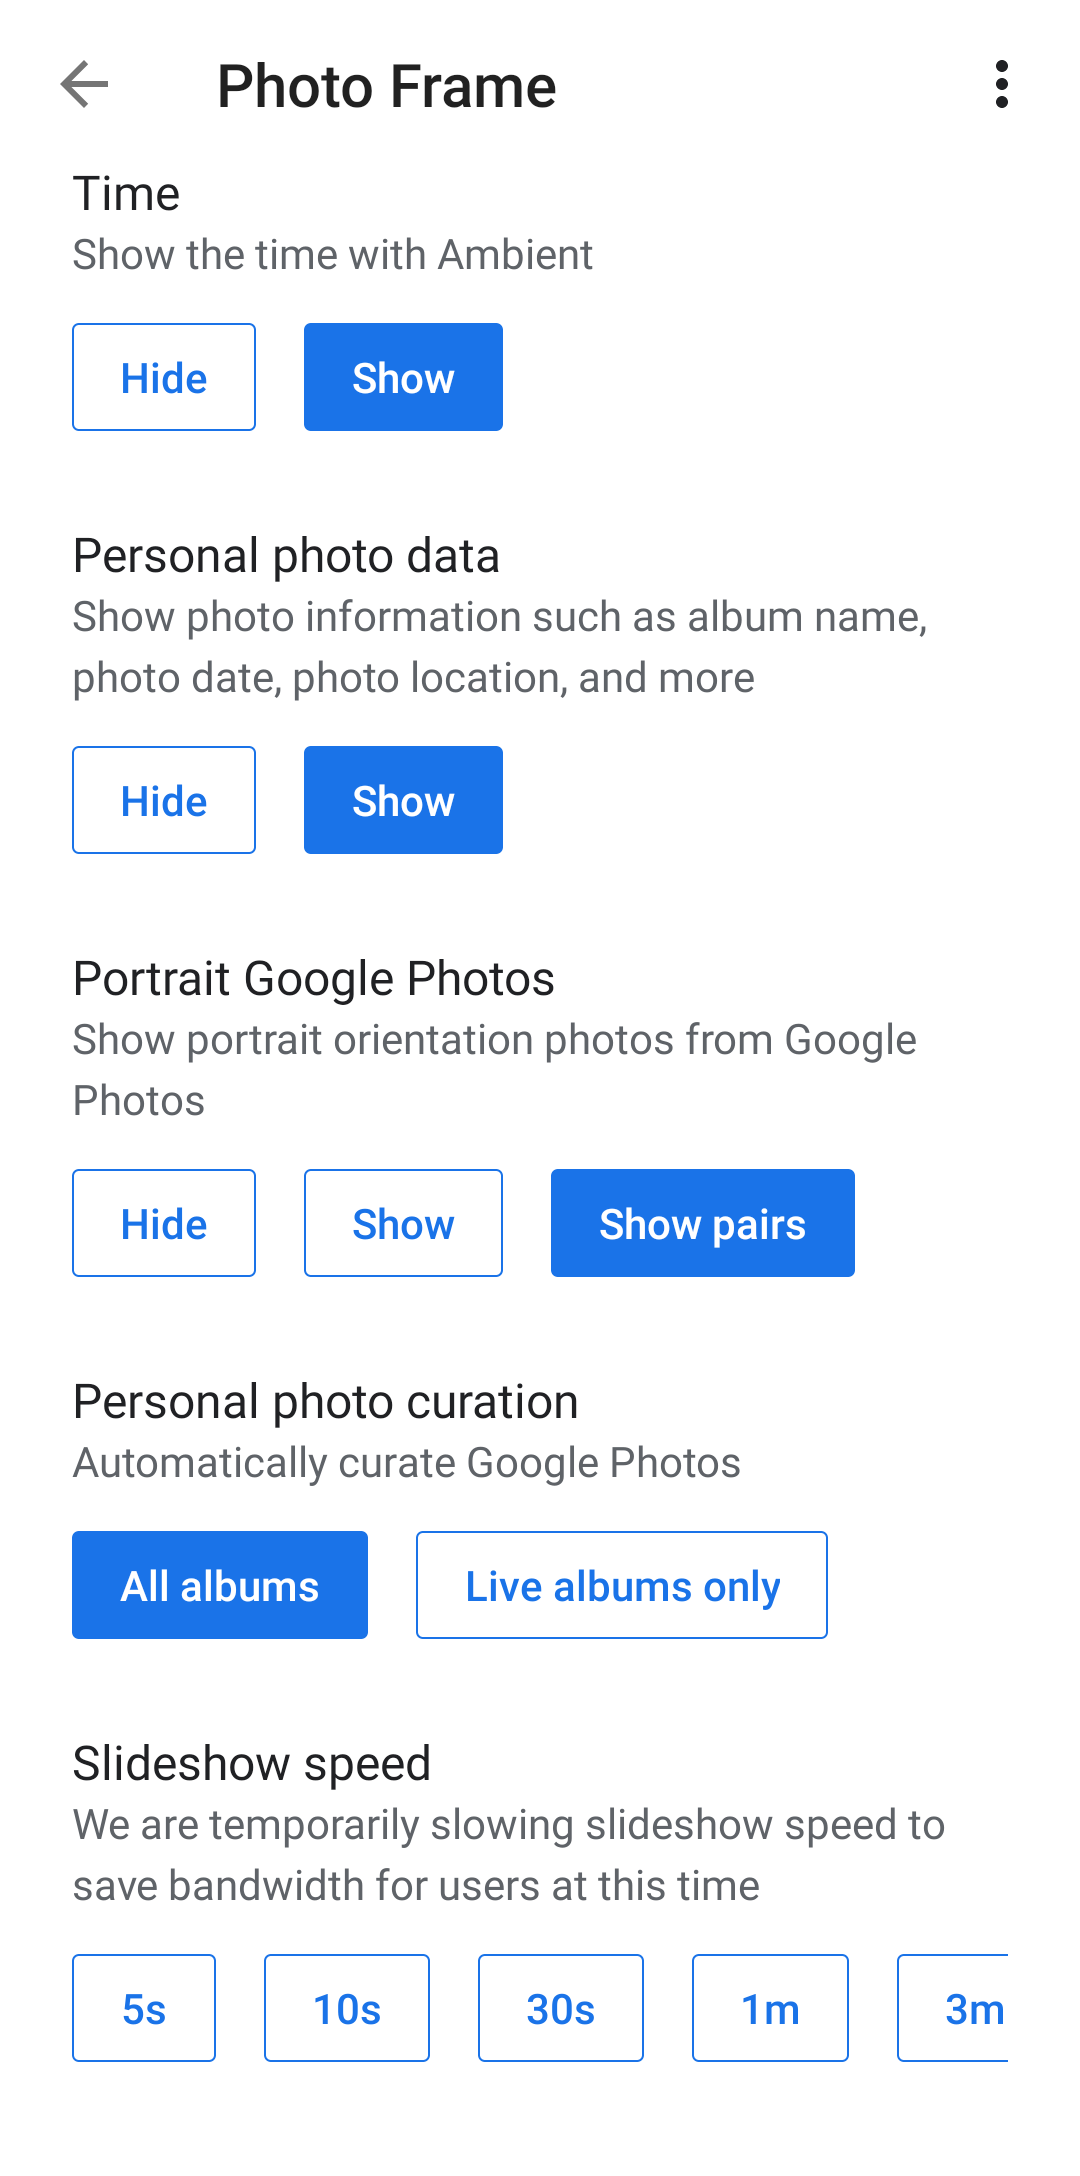 Screenshot shows the Photo Frame settings options in the Google Home app.